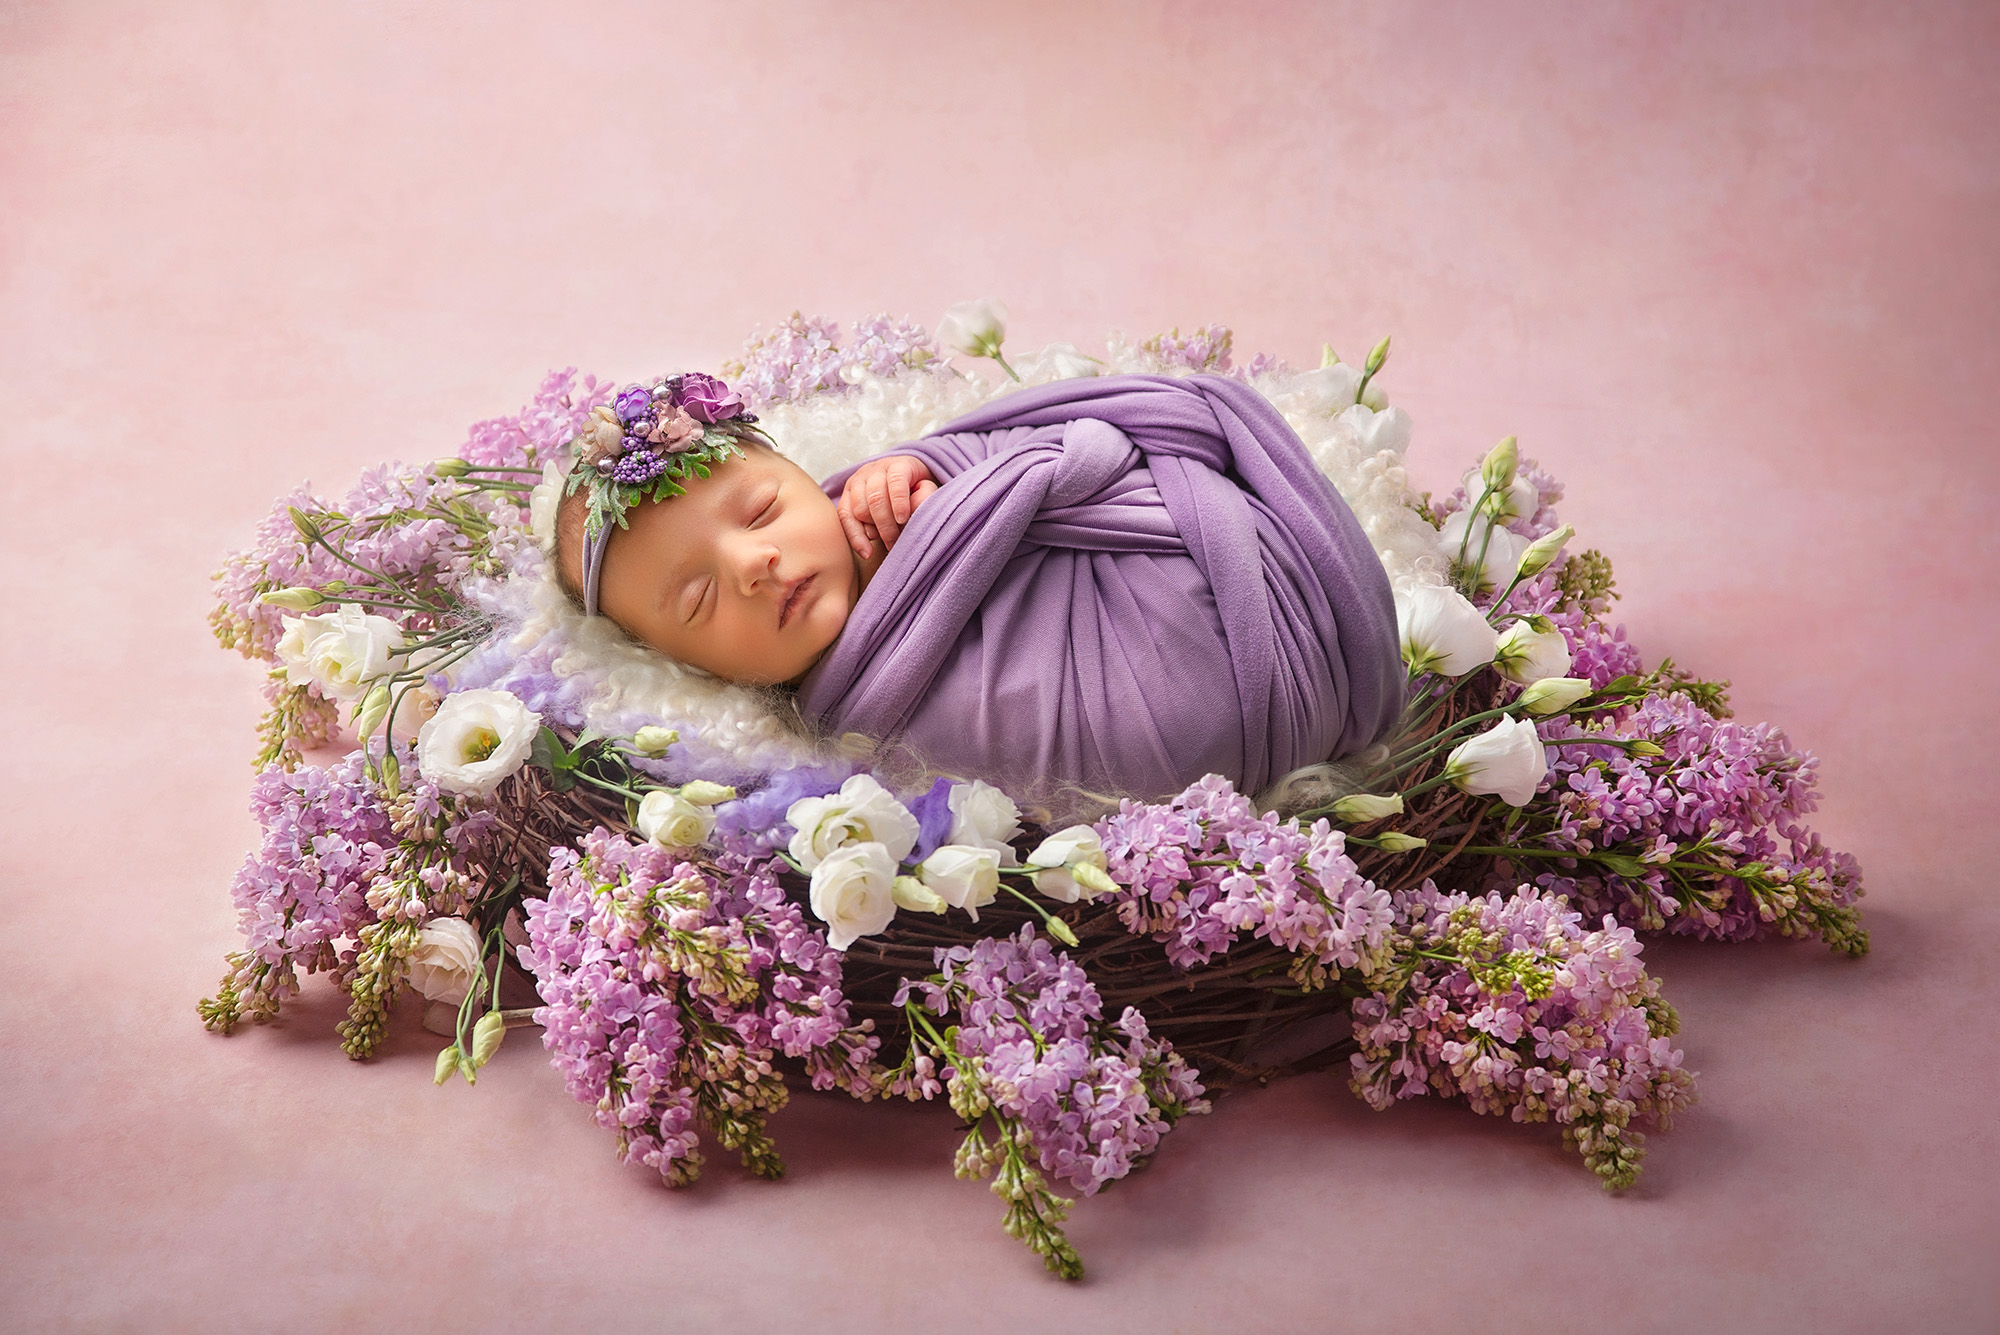 Dreaming peacefully in a nest of purple hydrangeas, this sleeping baby is a vision of pure contentment